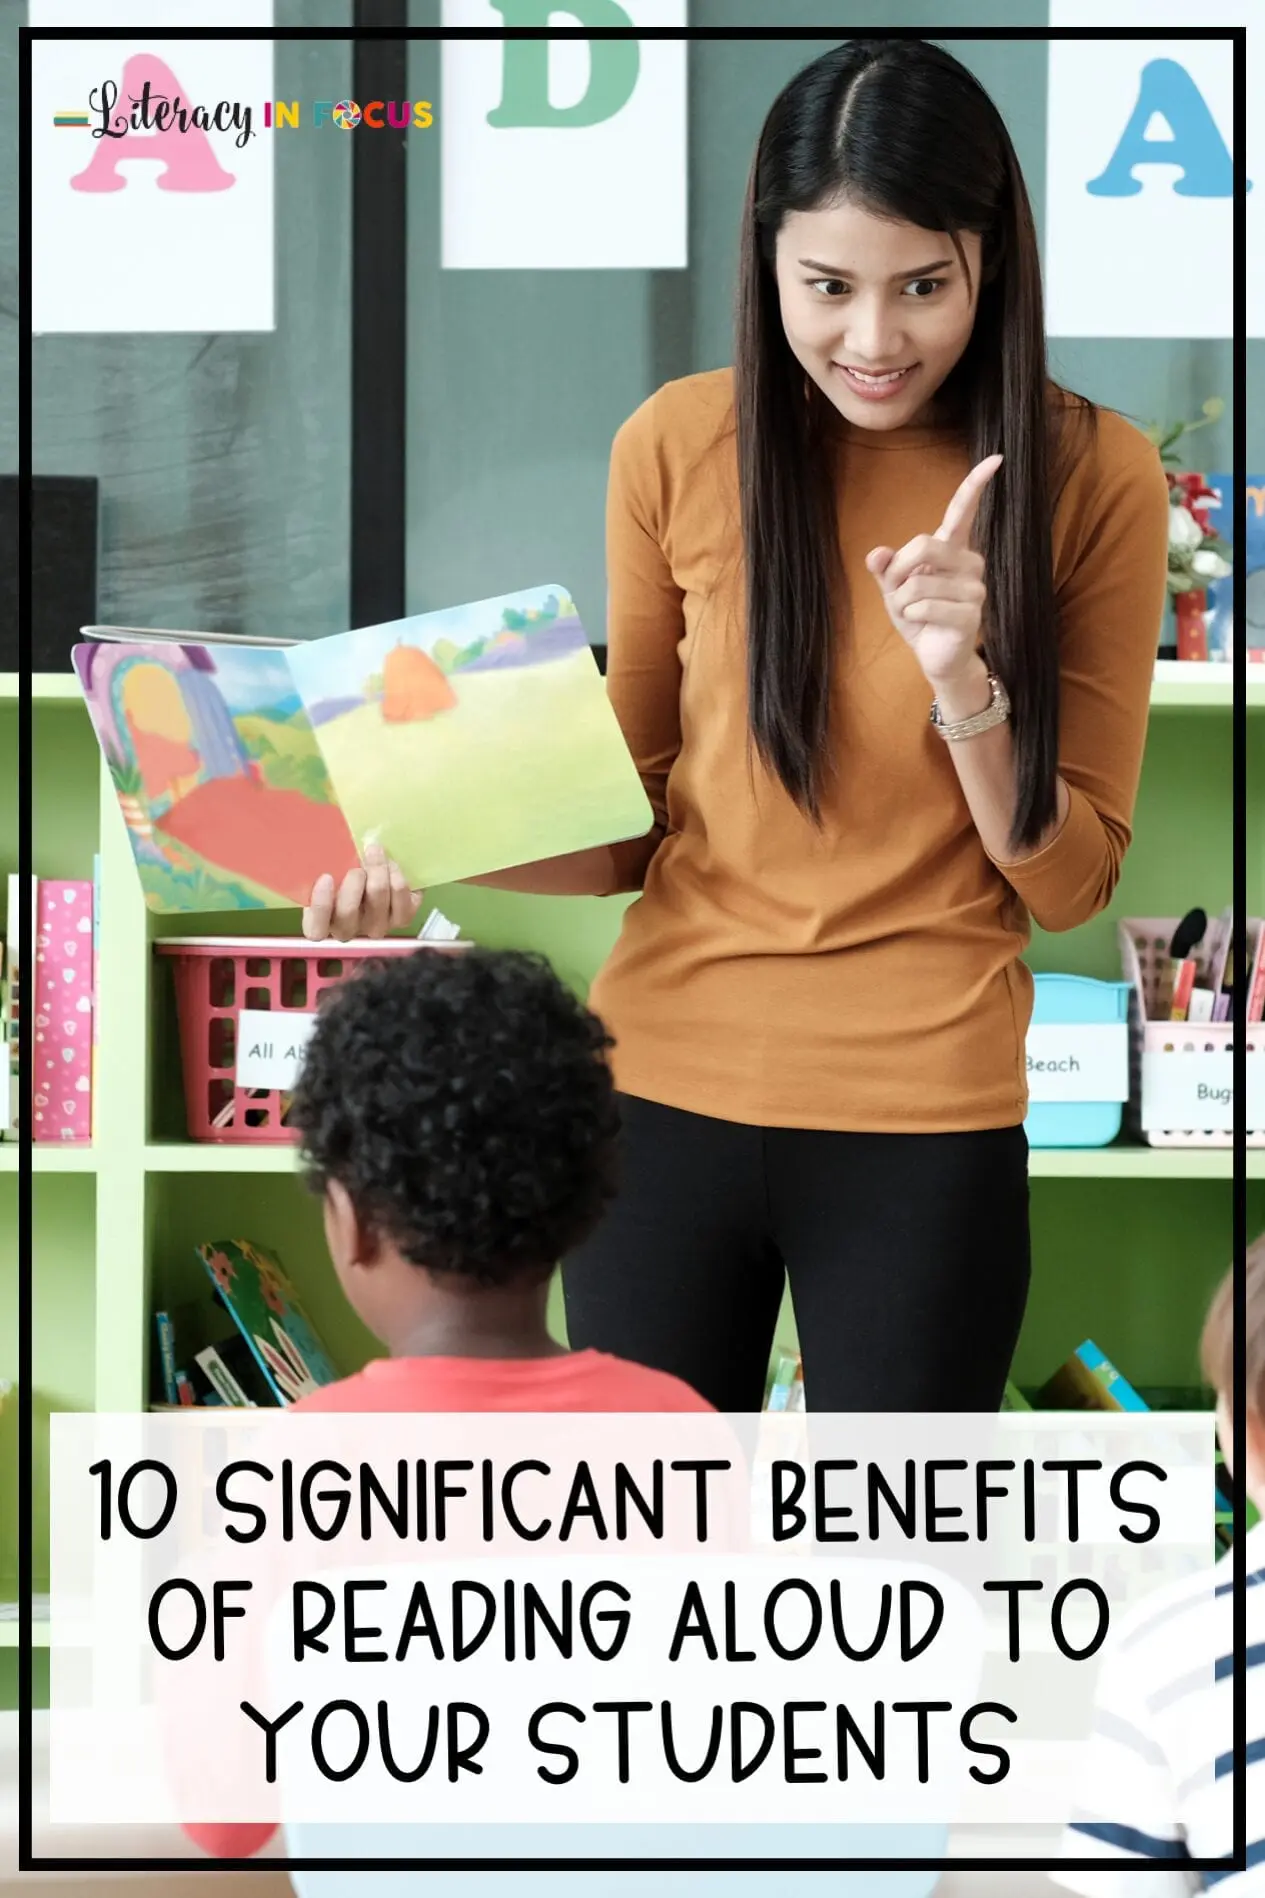 10 Significant Benefits of Reading Aloud to Your Students